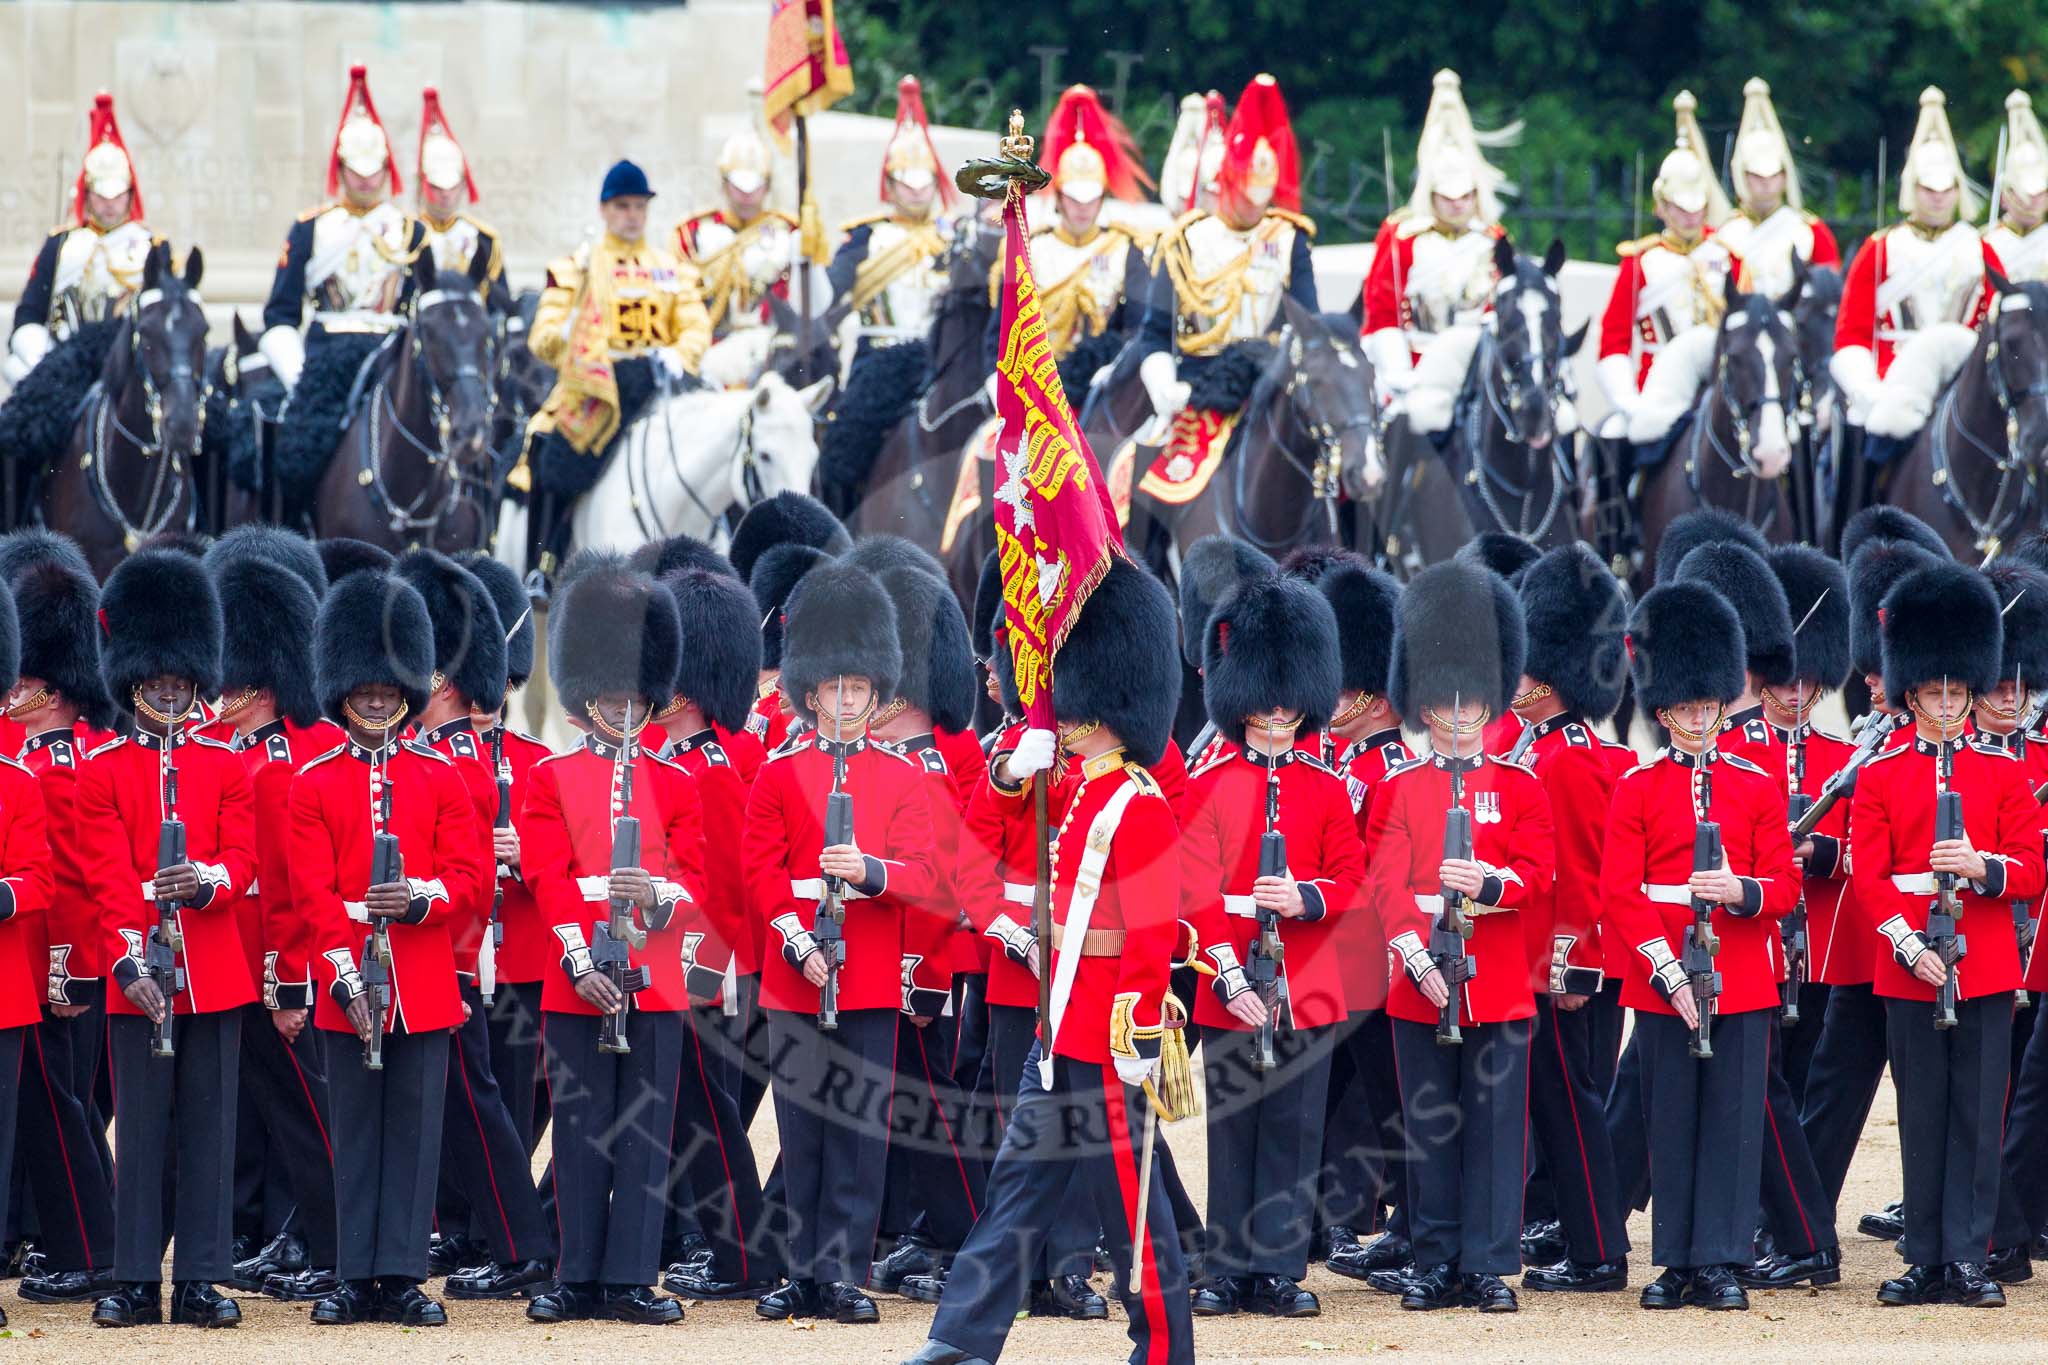 Trooping the Colour 2012: The Ensign, Second Lieutenant Hugo C Codrington, is trooping the Colour along No. 3 Guard, No. 7 Company, Coldstream Guards, whilst the Escort to the Colour, No. 1 Guard, is marching between the two lines of guardsmen..
Horse Guards Parade, Westminster,
London SW1,

United Kingdom,
on 16 June 2012 at 11:27, image #354